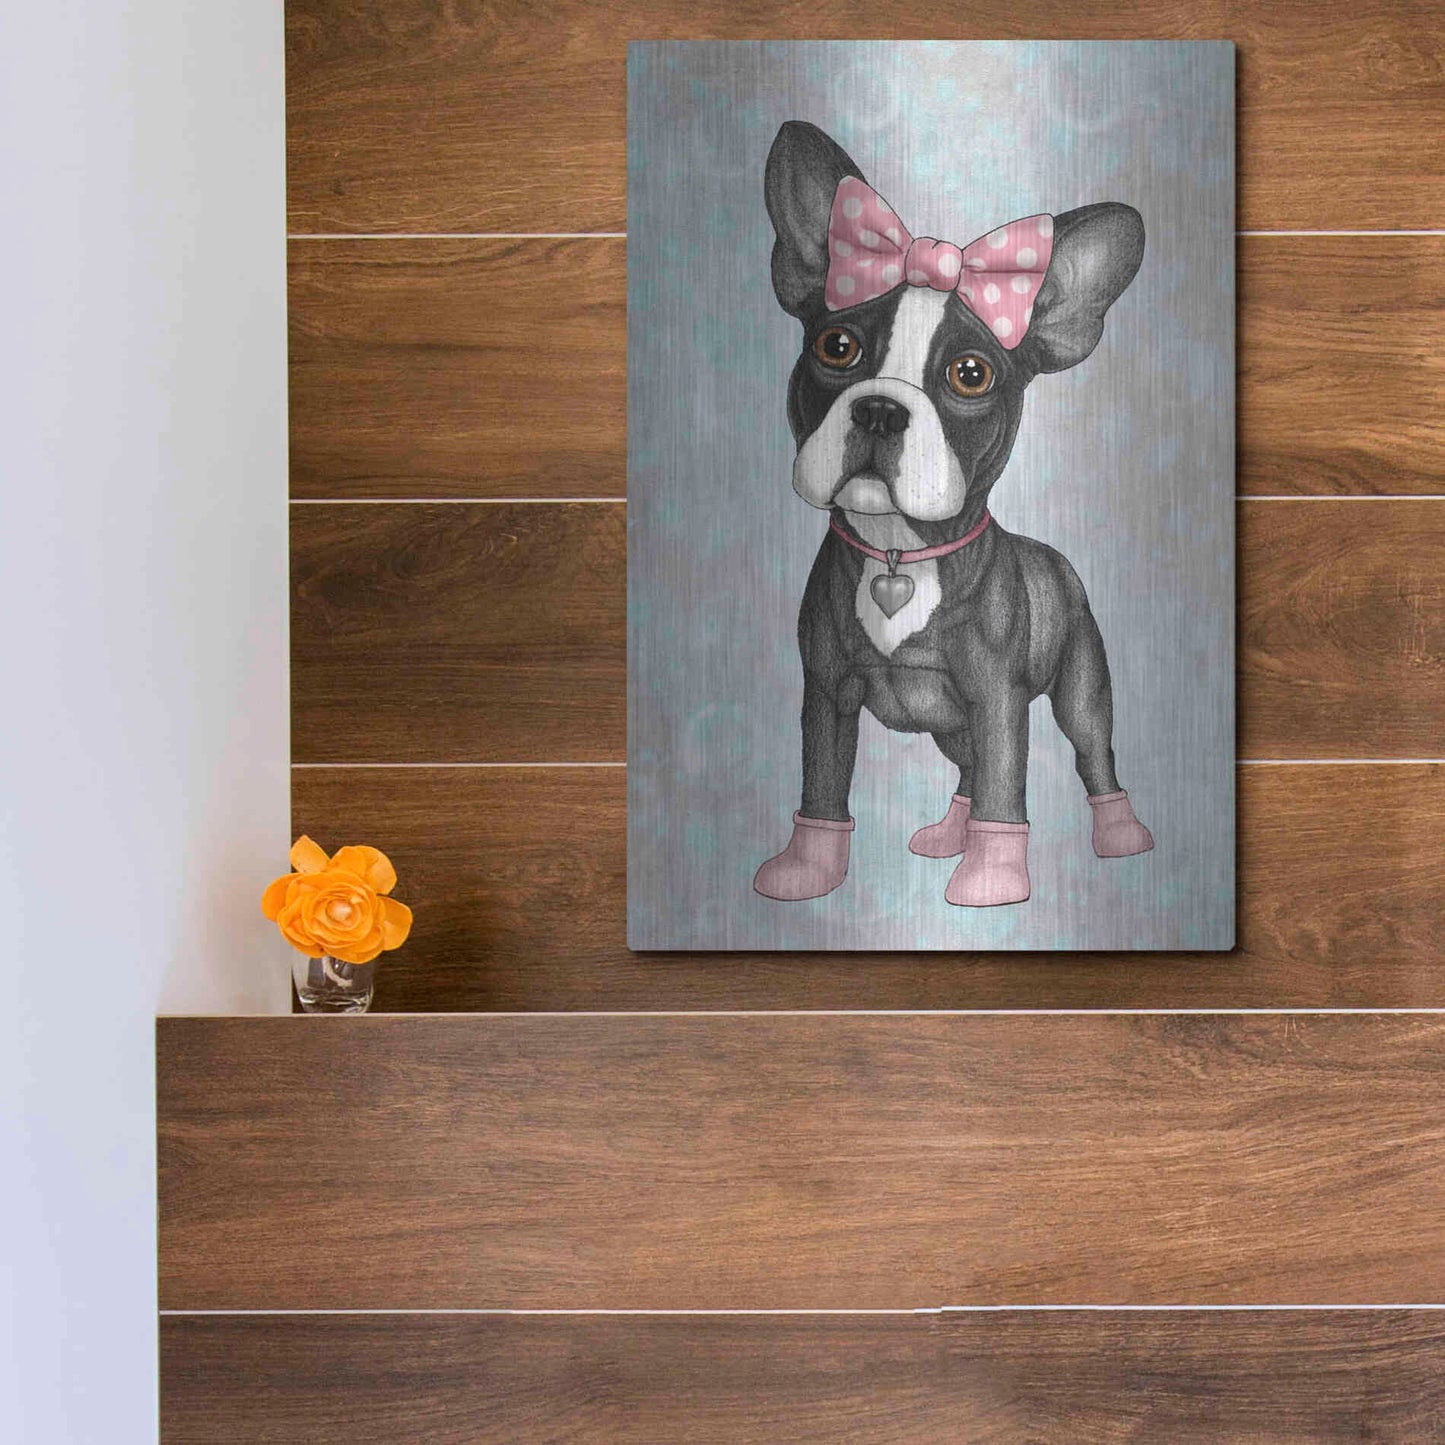 Luxe Metal Art 'Sweet Frenchie' by Barruf Metal Wall Art,12x16